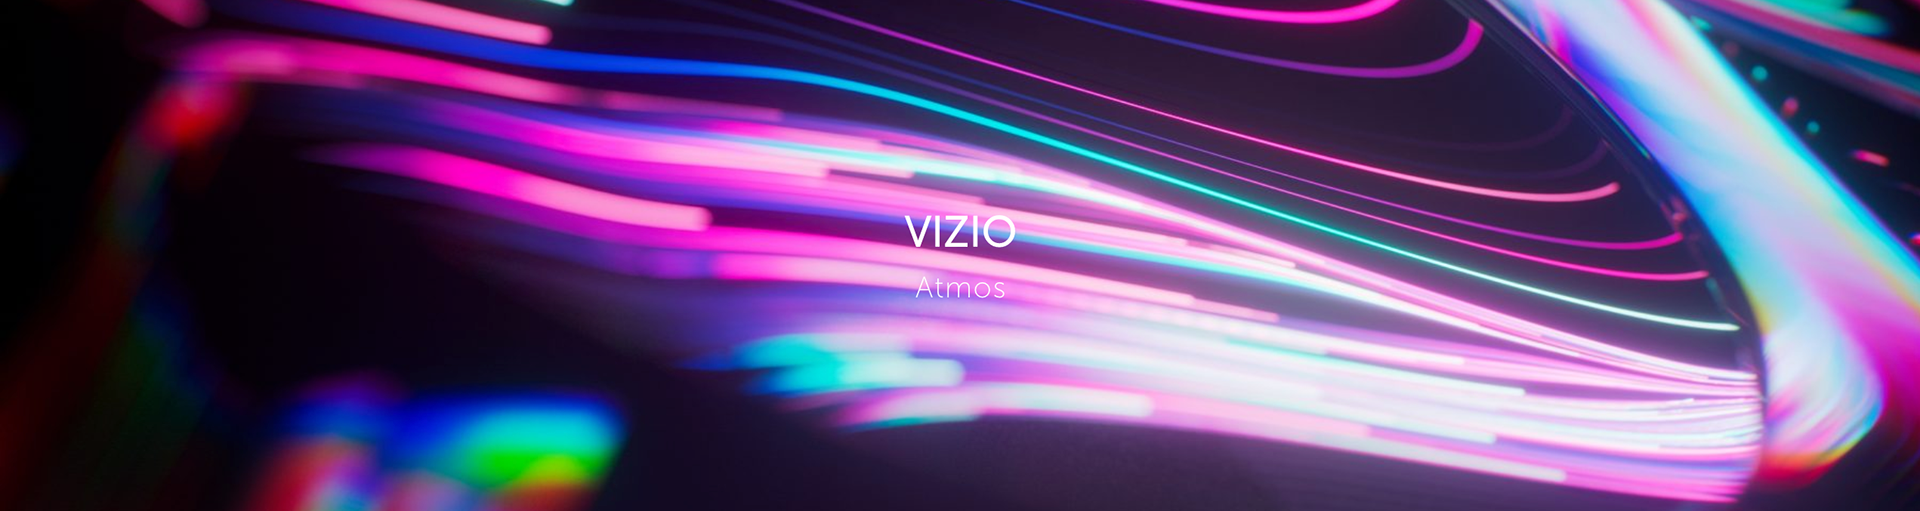 VIZIO Dolby Atmos on Behance412f7082767779.5d275d498aacc.png